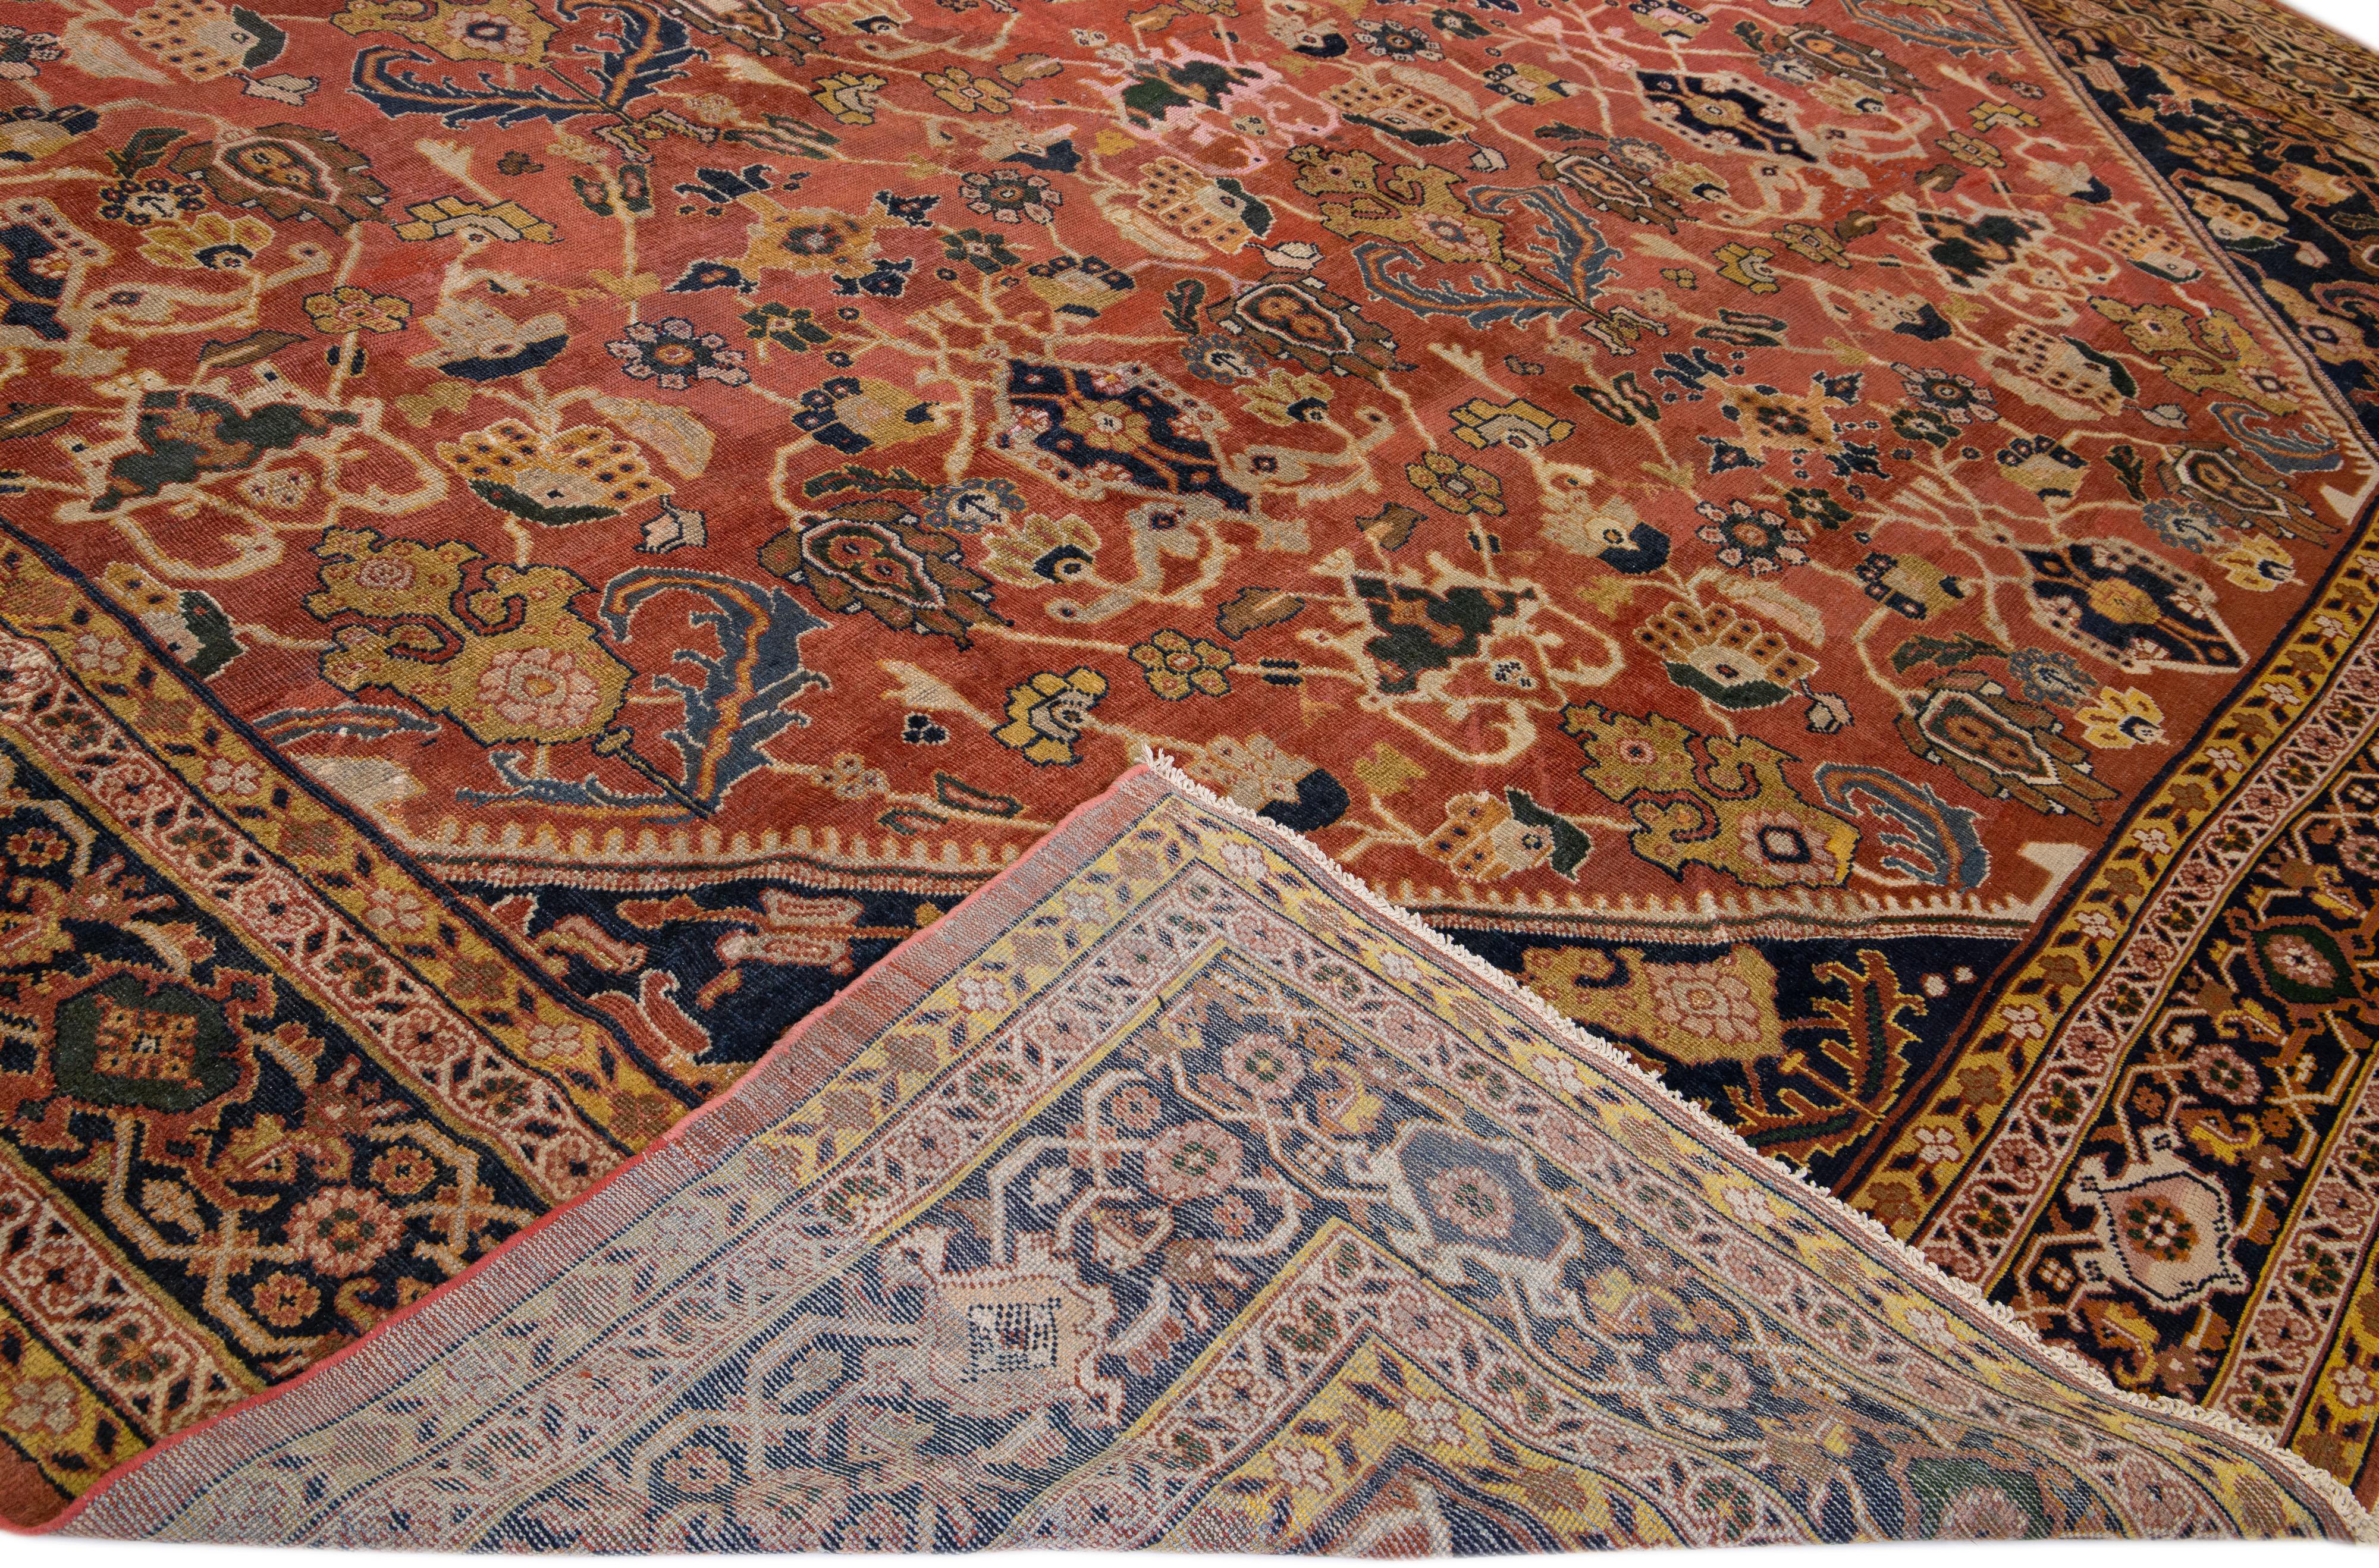 A beautiful Antique Mahal hand-knotted wool rug with a rust color field. This rug has a dark blue frame and multicolor accents in an all-over floral design.

This rug measures 15'6